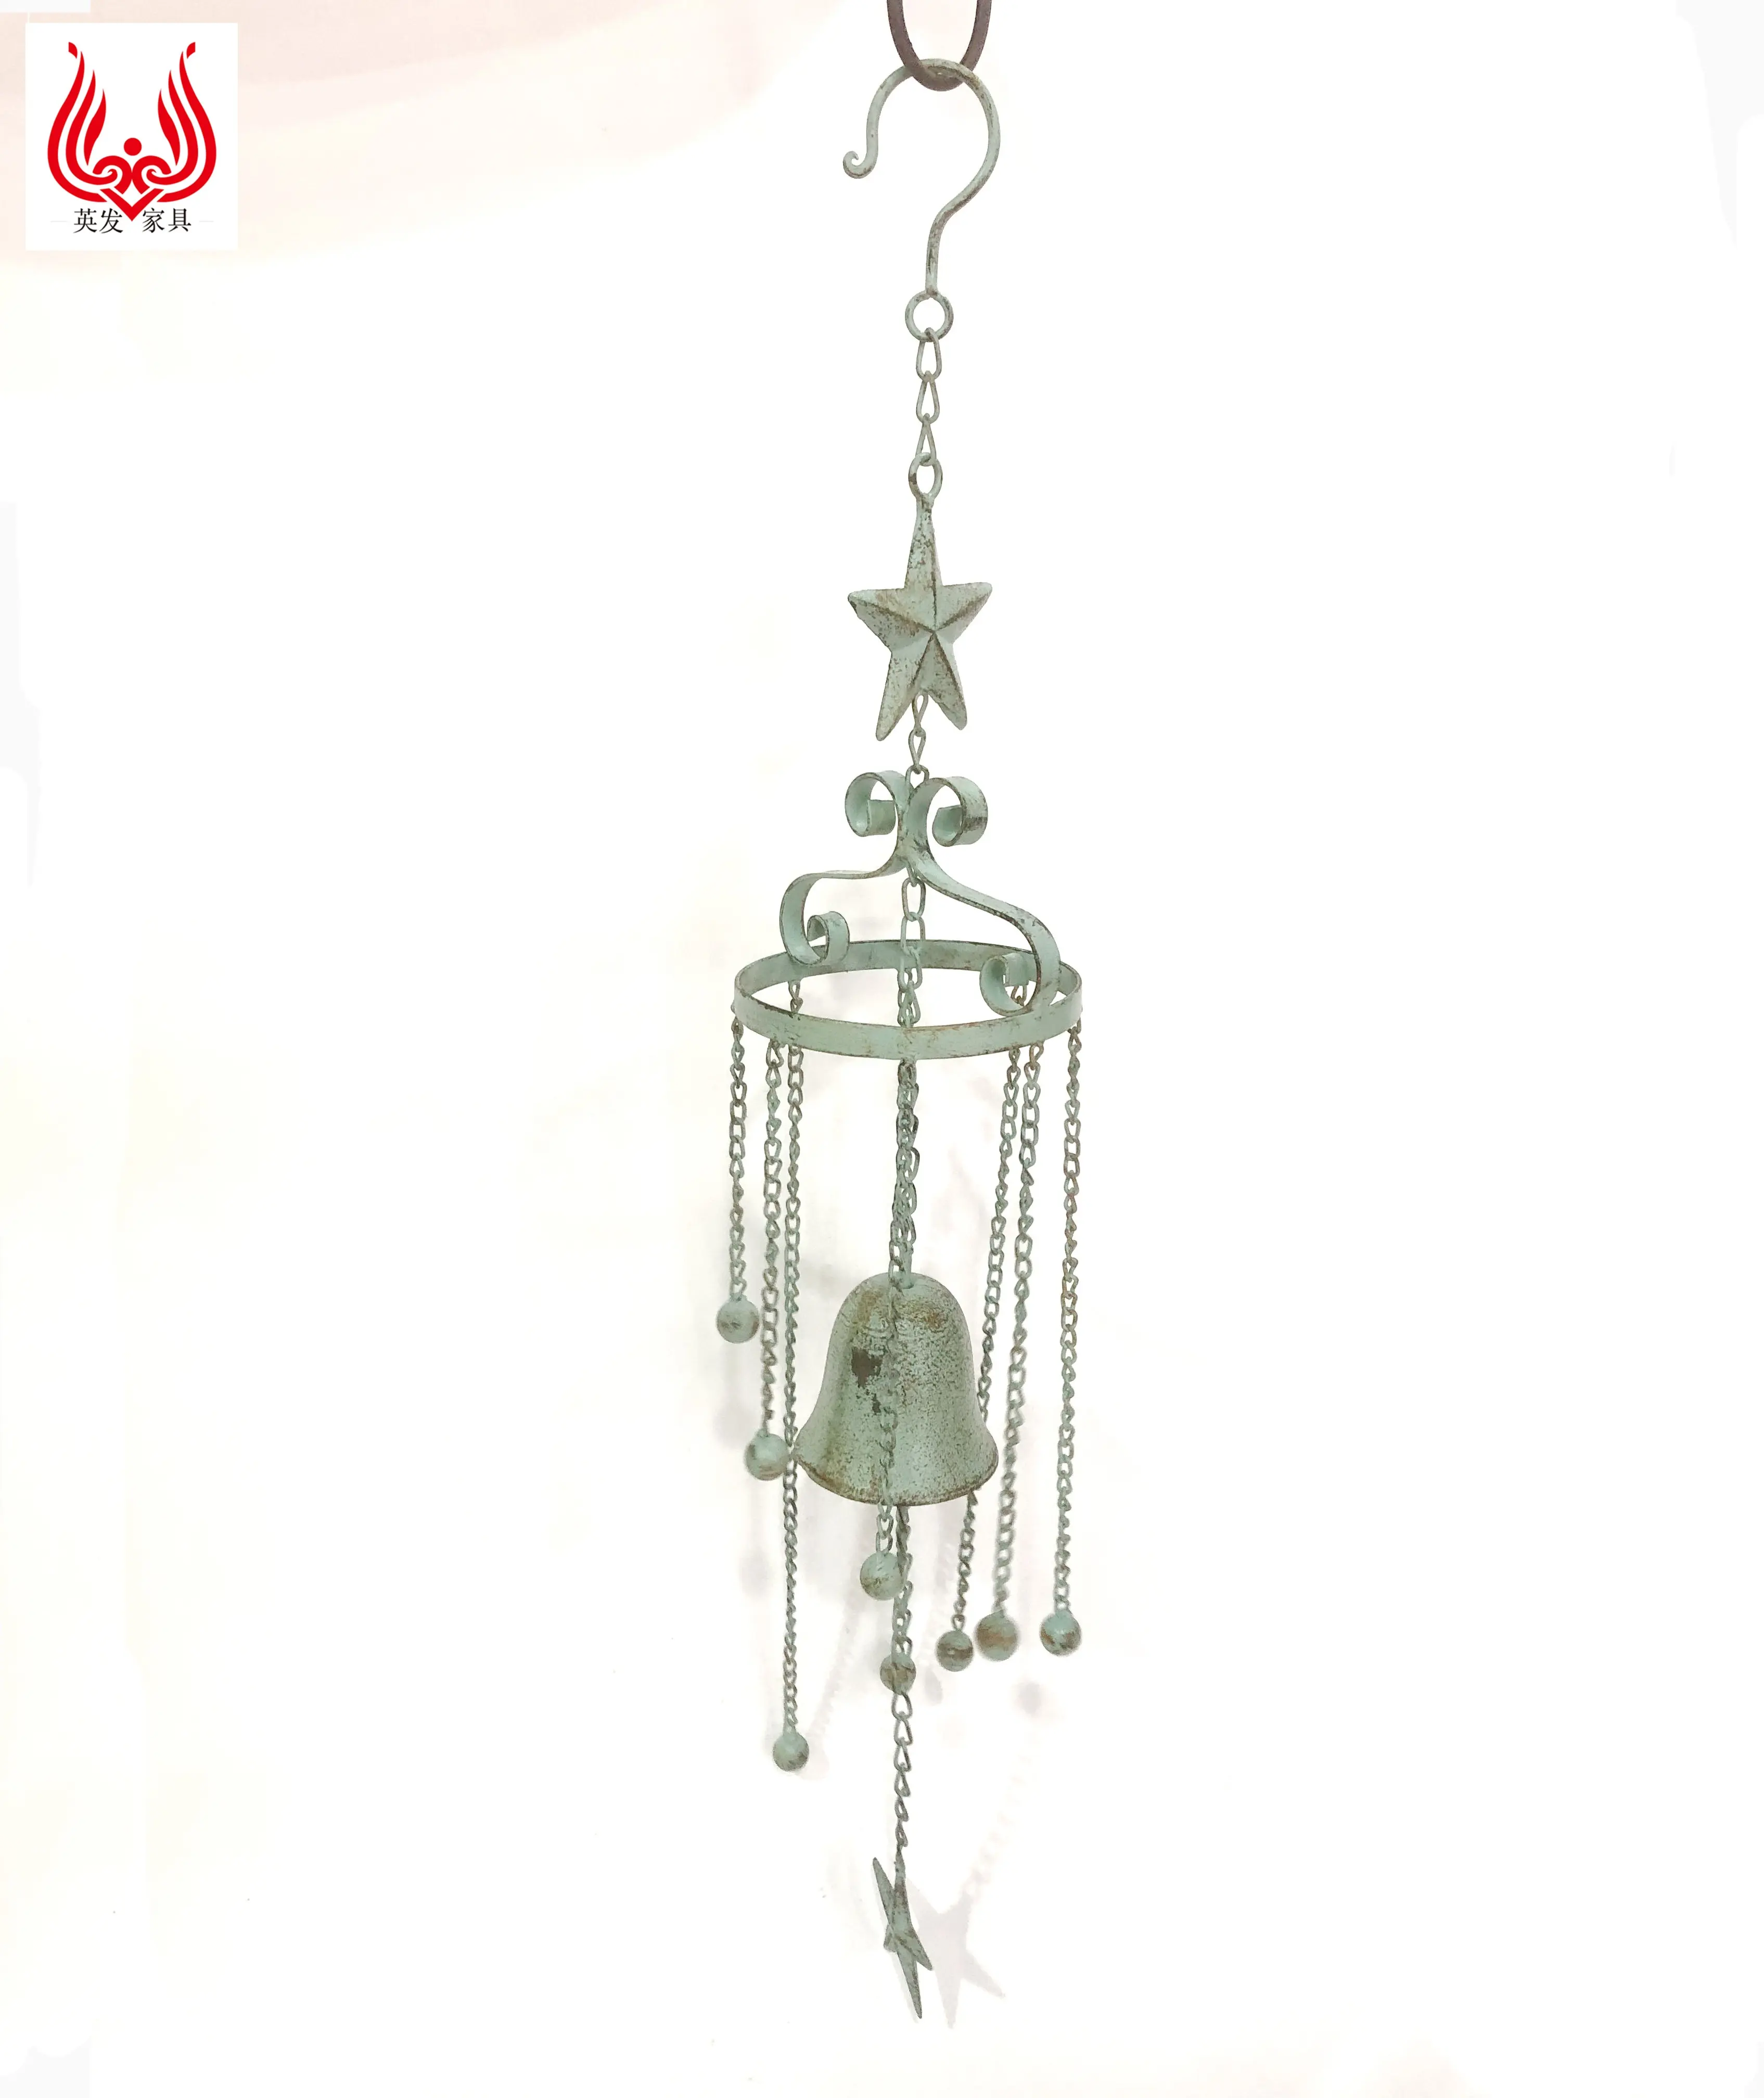 OEM Cast Iron Antique Five Star Metal Wind Chimes Hanging Wrought Iron Bell for Home Garden Decor